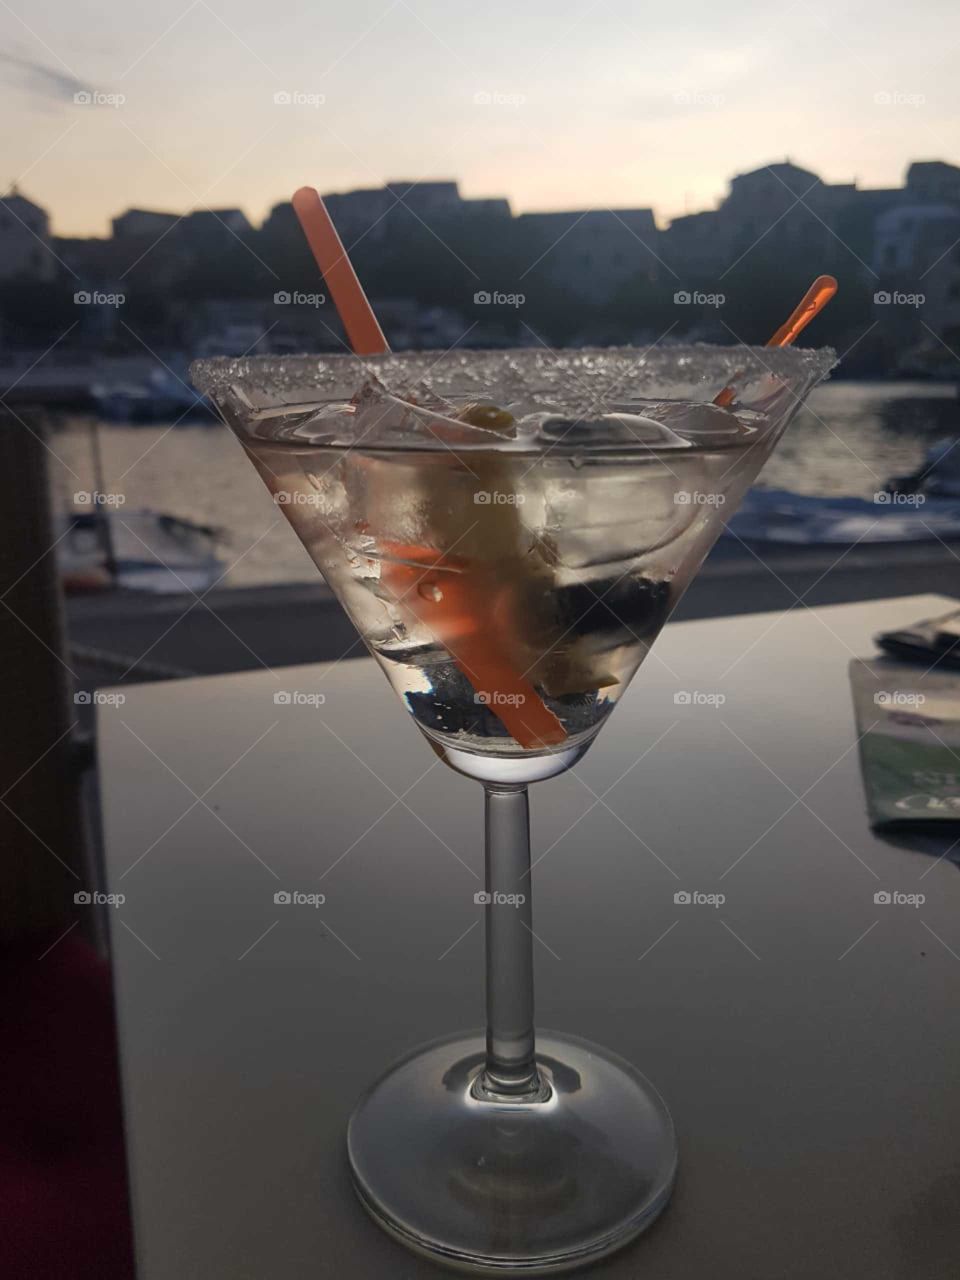 Simple picture of a cocktail glass and enjoyed.